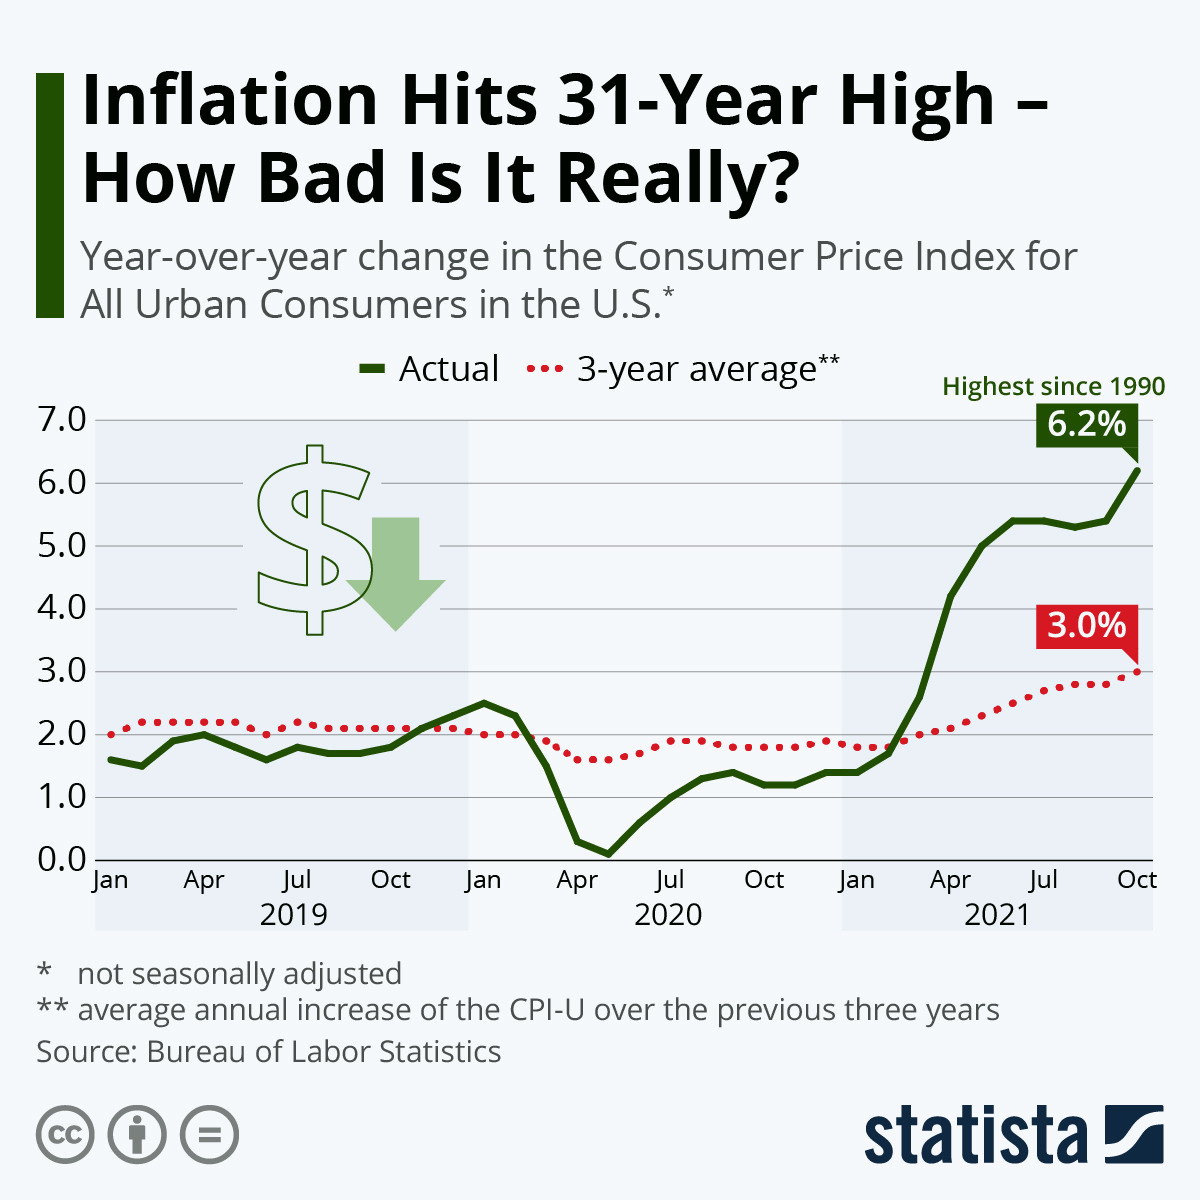 Inflation Hits 31-Year High - How Bad Is It Really?